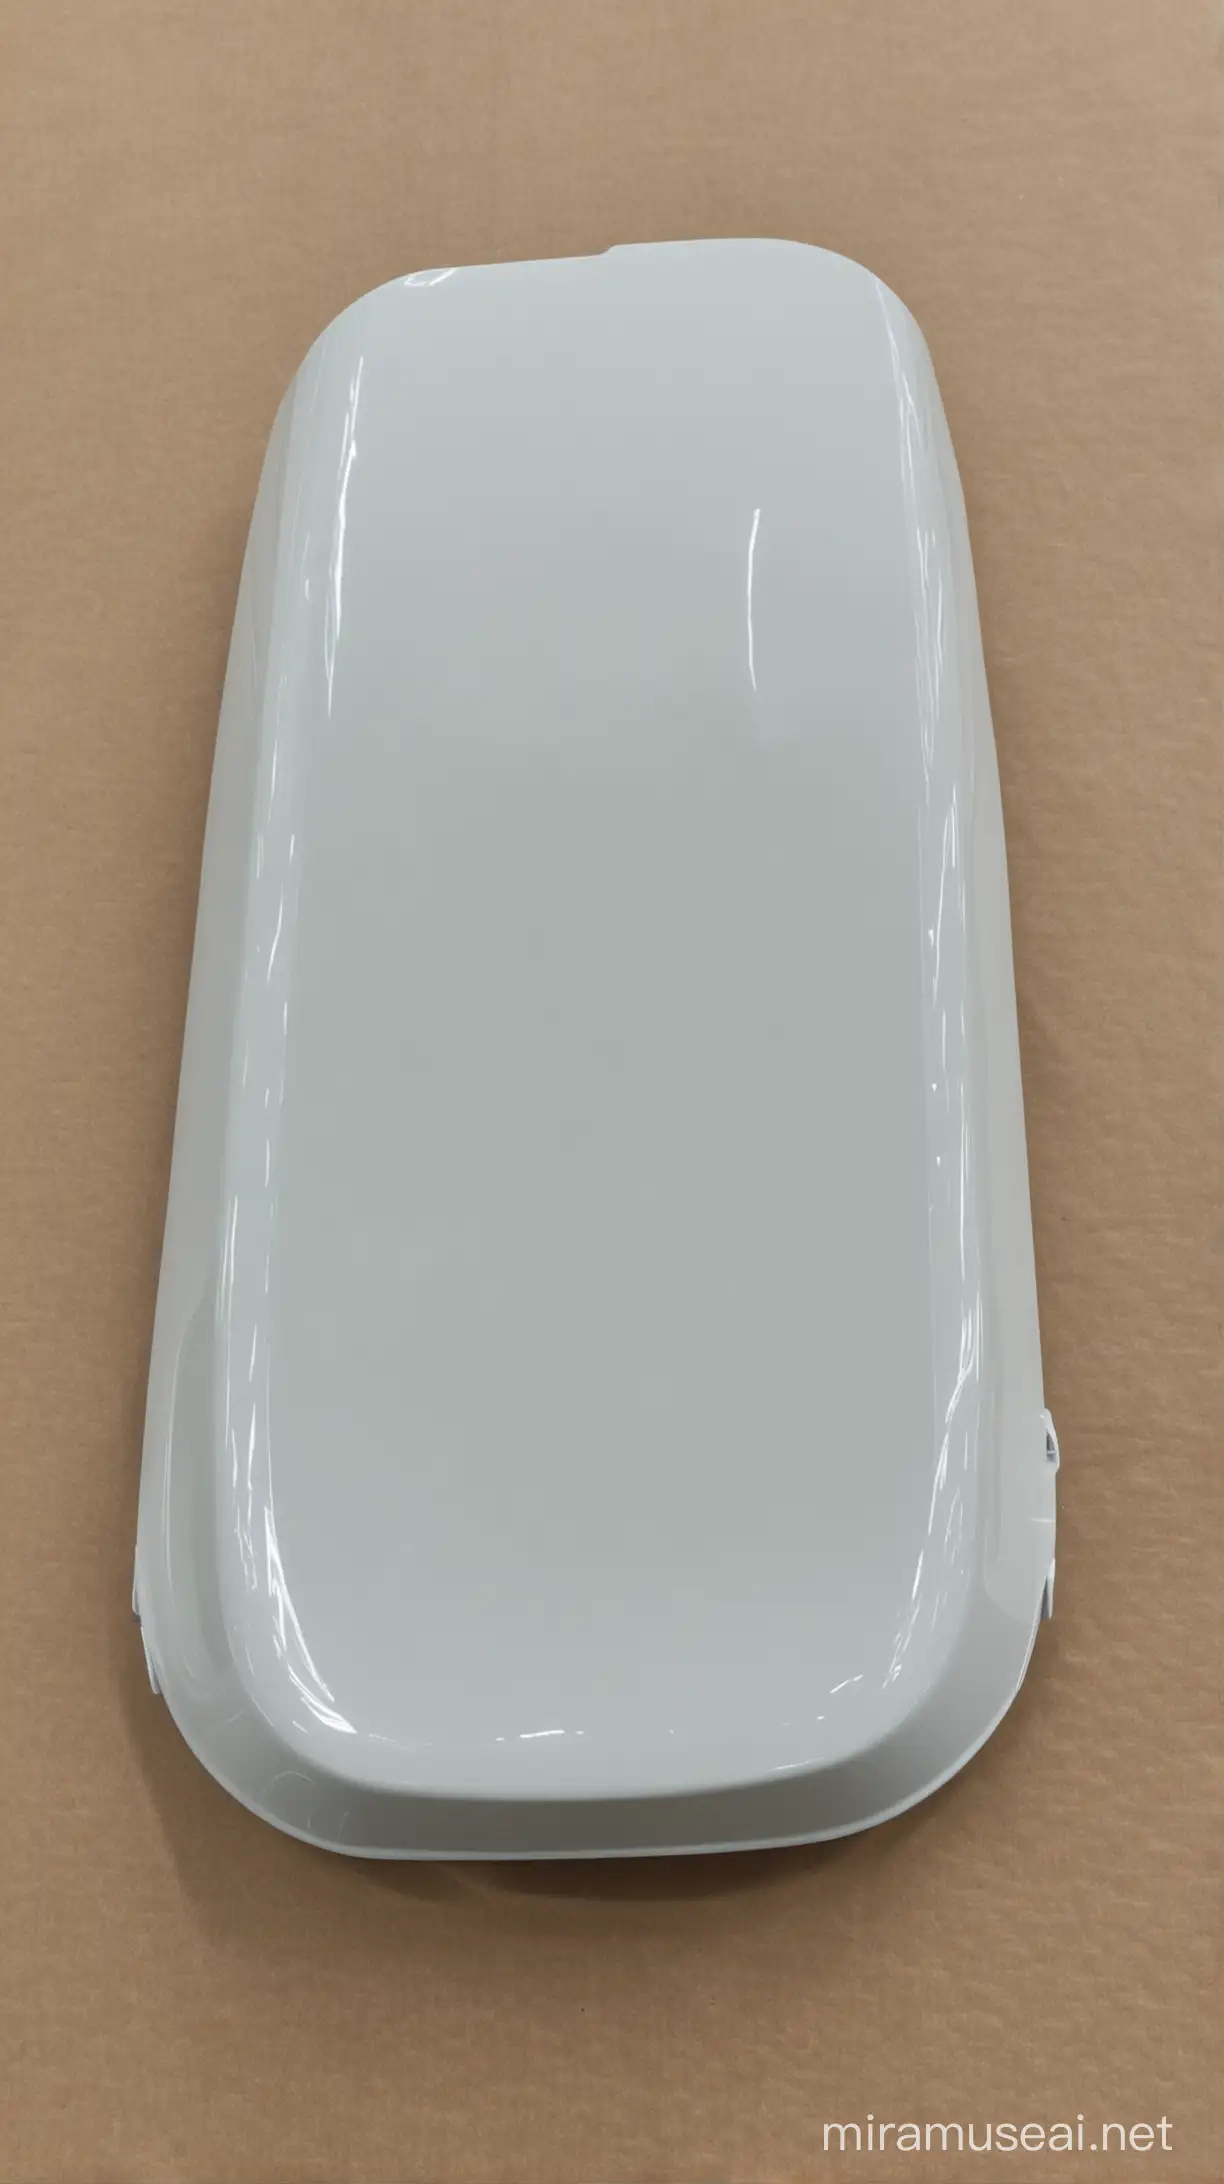  fiberglass part for special truck, part for headlights, high quality, glossy, high resolution